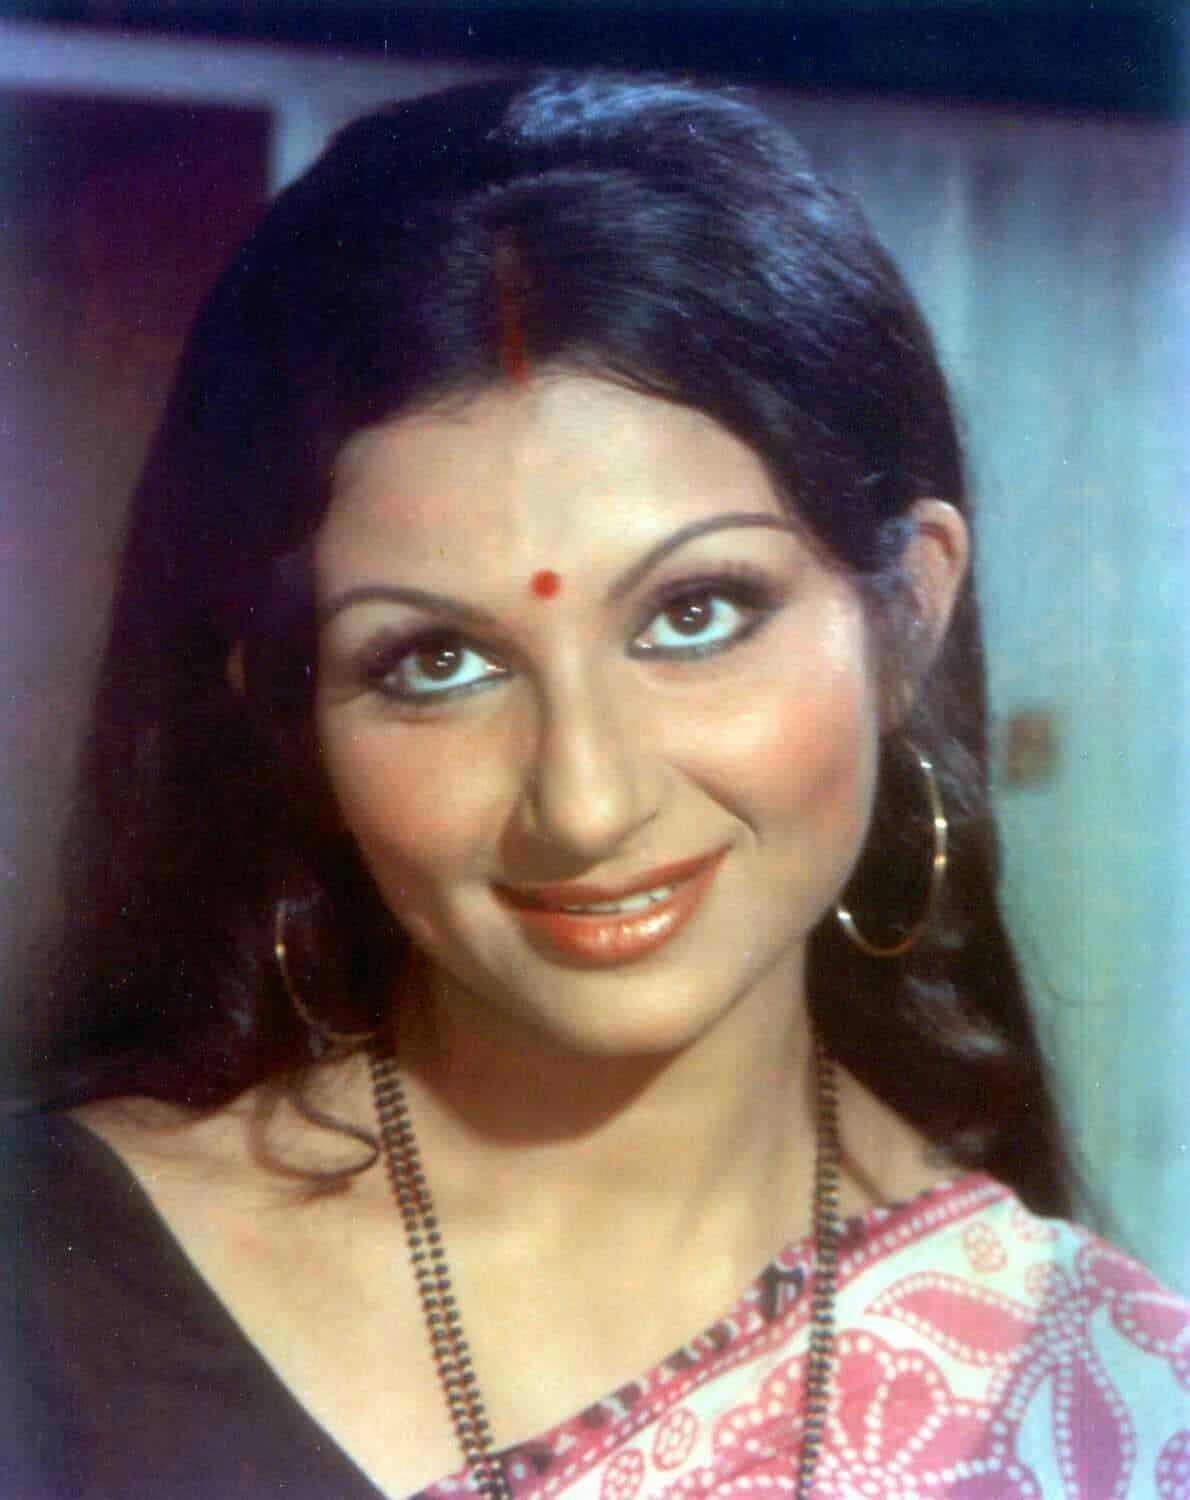 Sharmila Tagore has been a style icon for more than half a century. On her birthday, 20 pics of her best looks